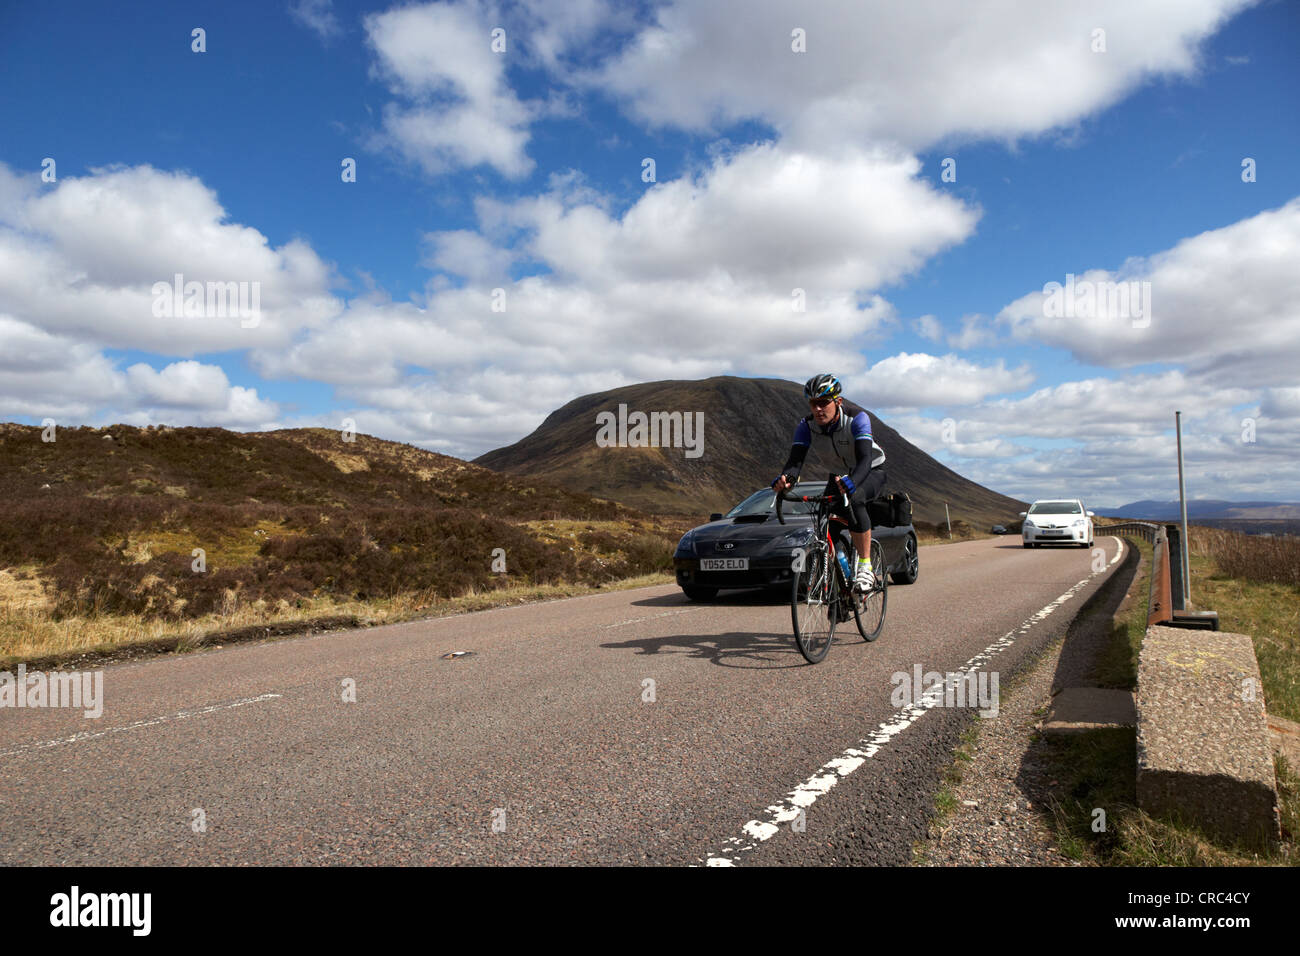 cyclist being overtaken by car on rural country road the a82 road in glencoe highlands scotland uk Stock Photo